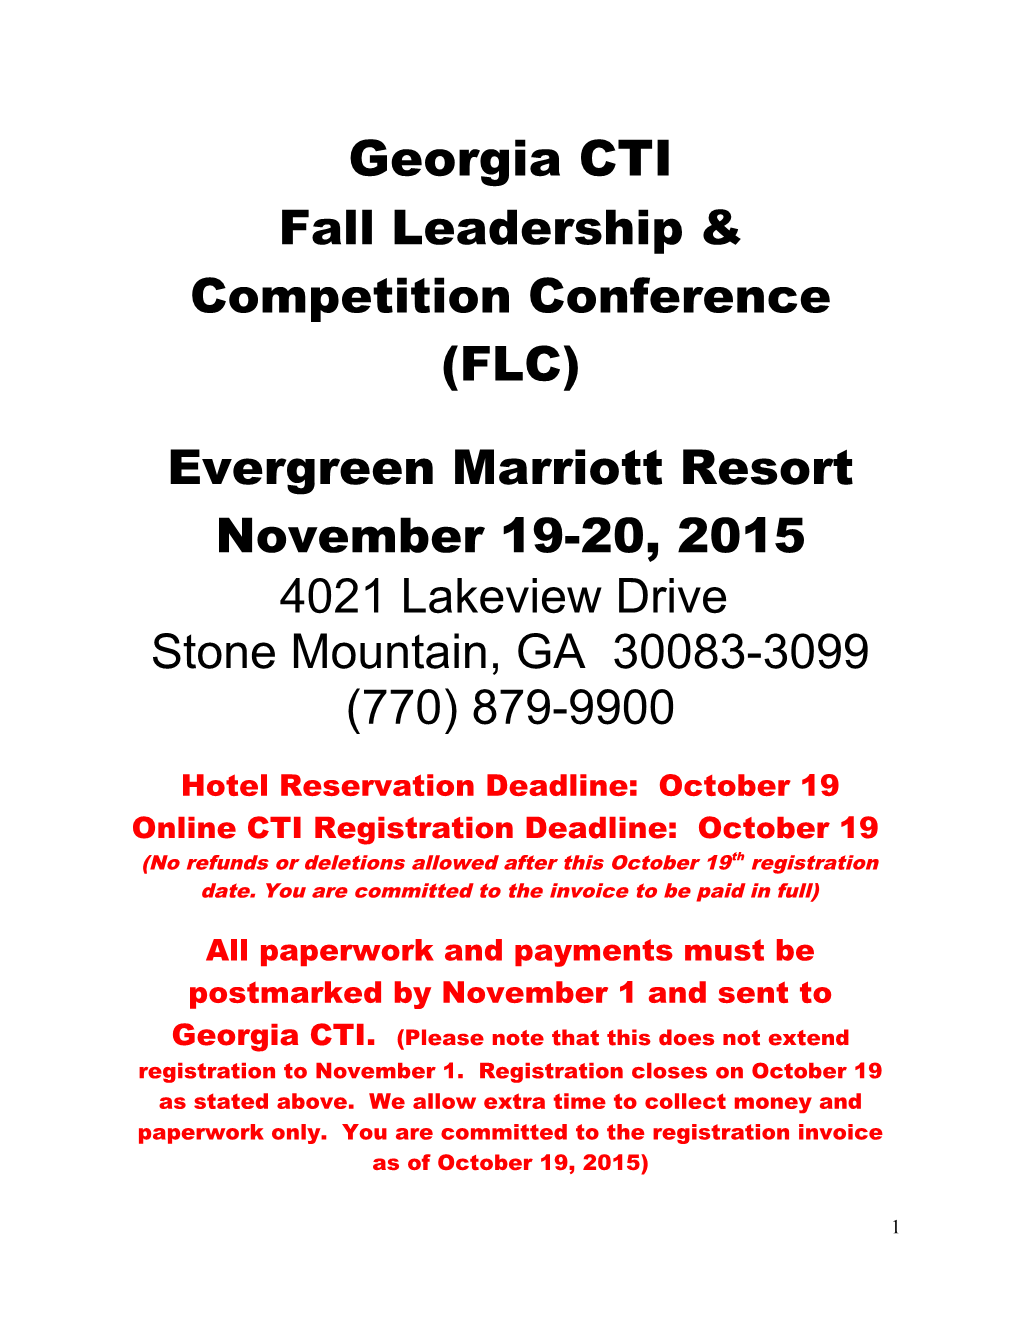 Fall Leadership & Competition Conference (FLC)